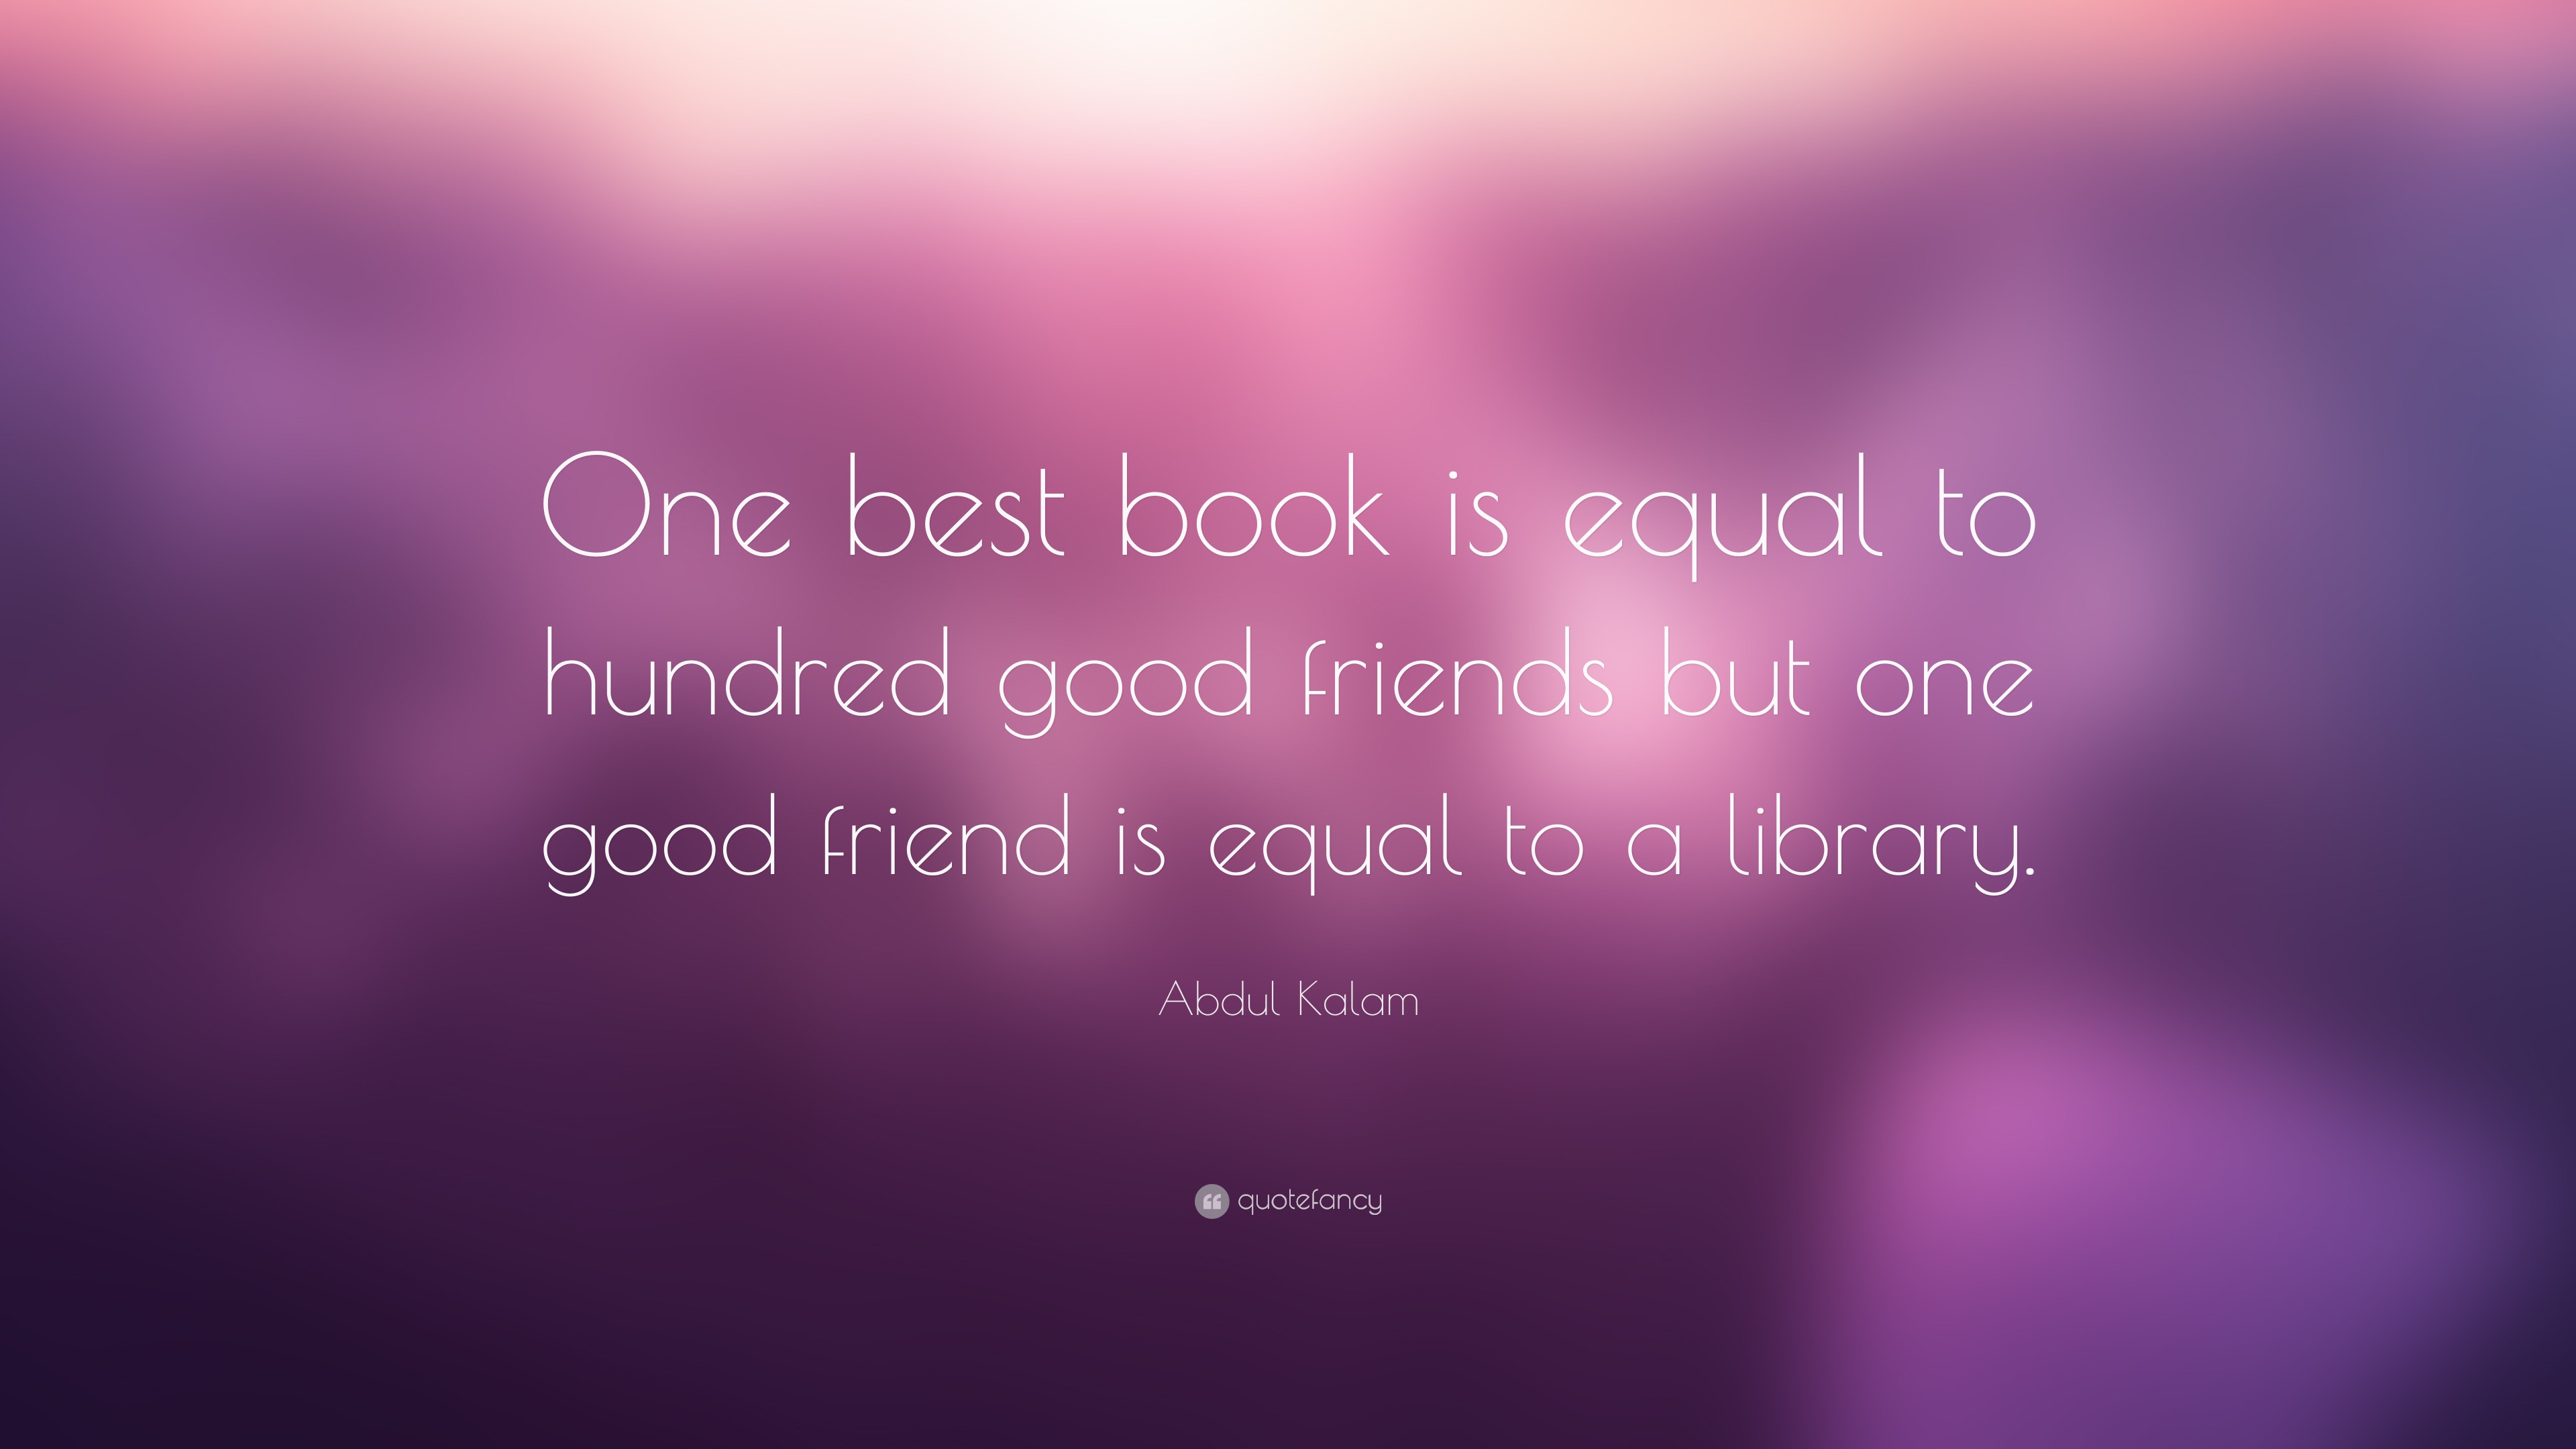 Abdul Kalam Quote: “One best book is equal to hundred good friends but ...